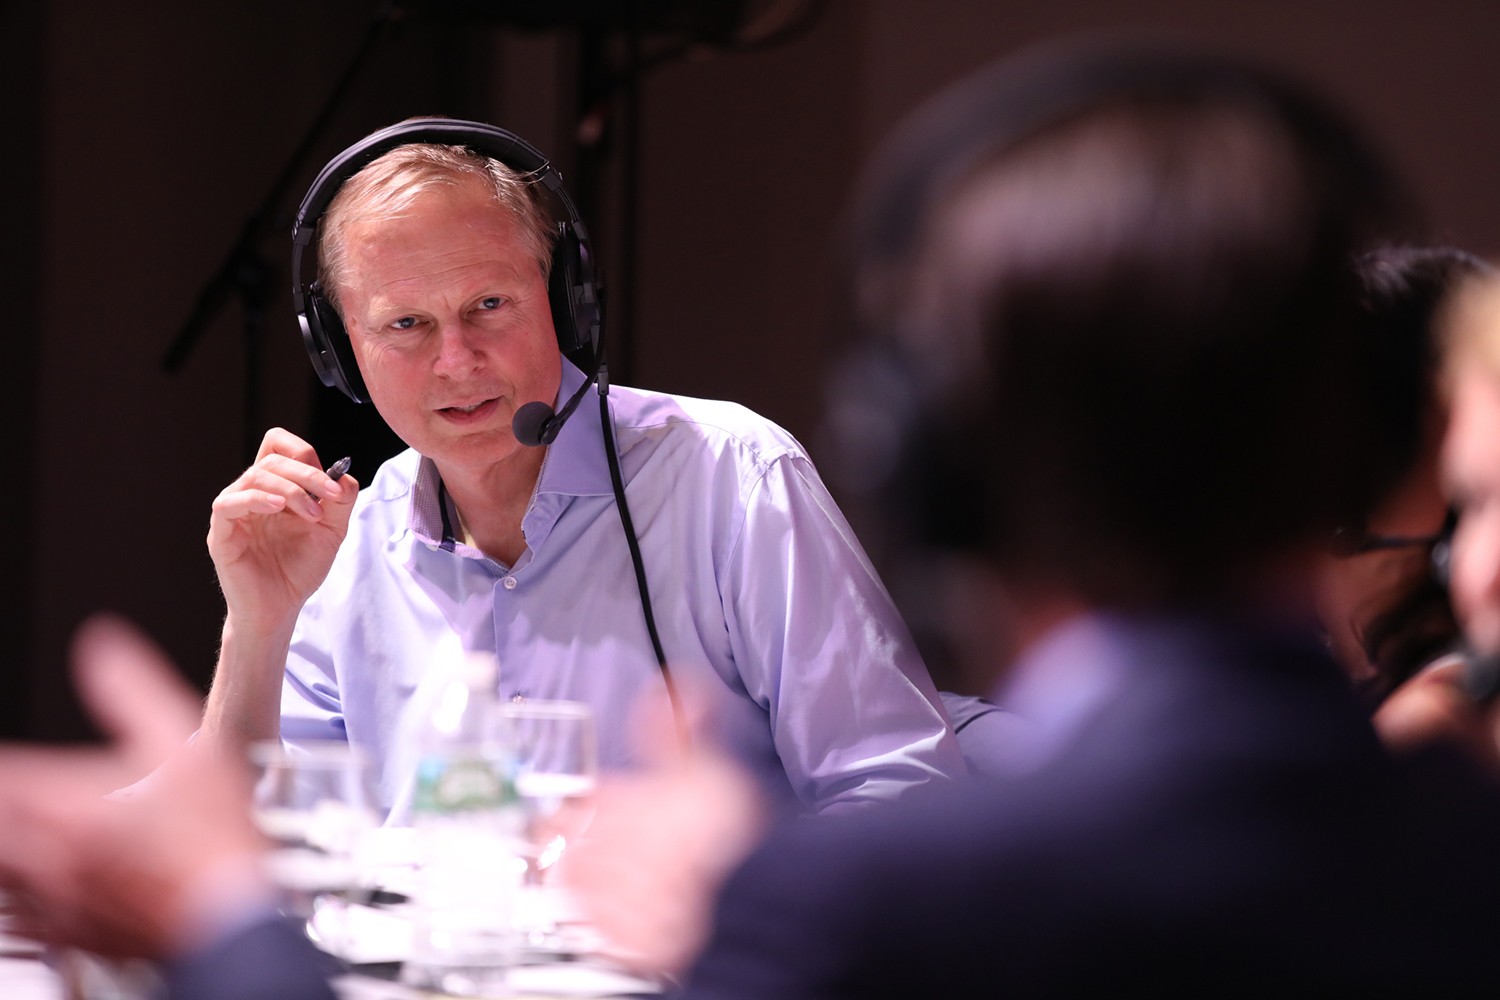 Tom Ashbrook moderates a discussion at the #OnPointLive show in Portland, Maine. (Brian Bechard/Maine Public)